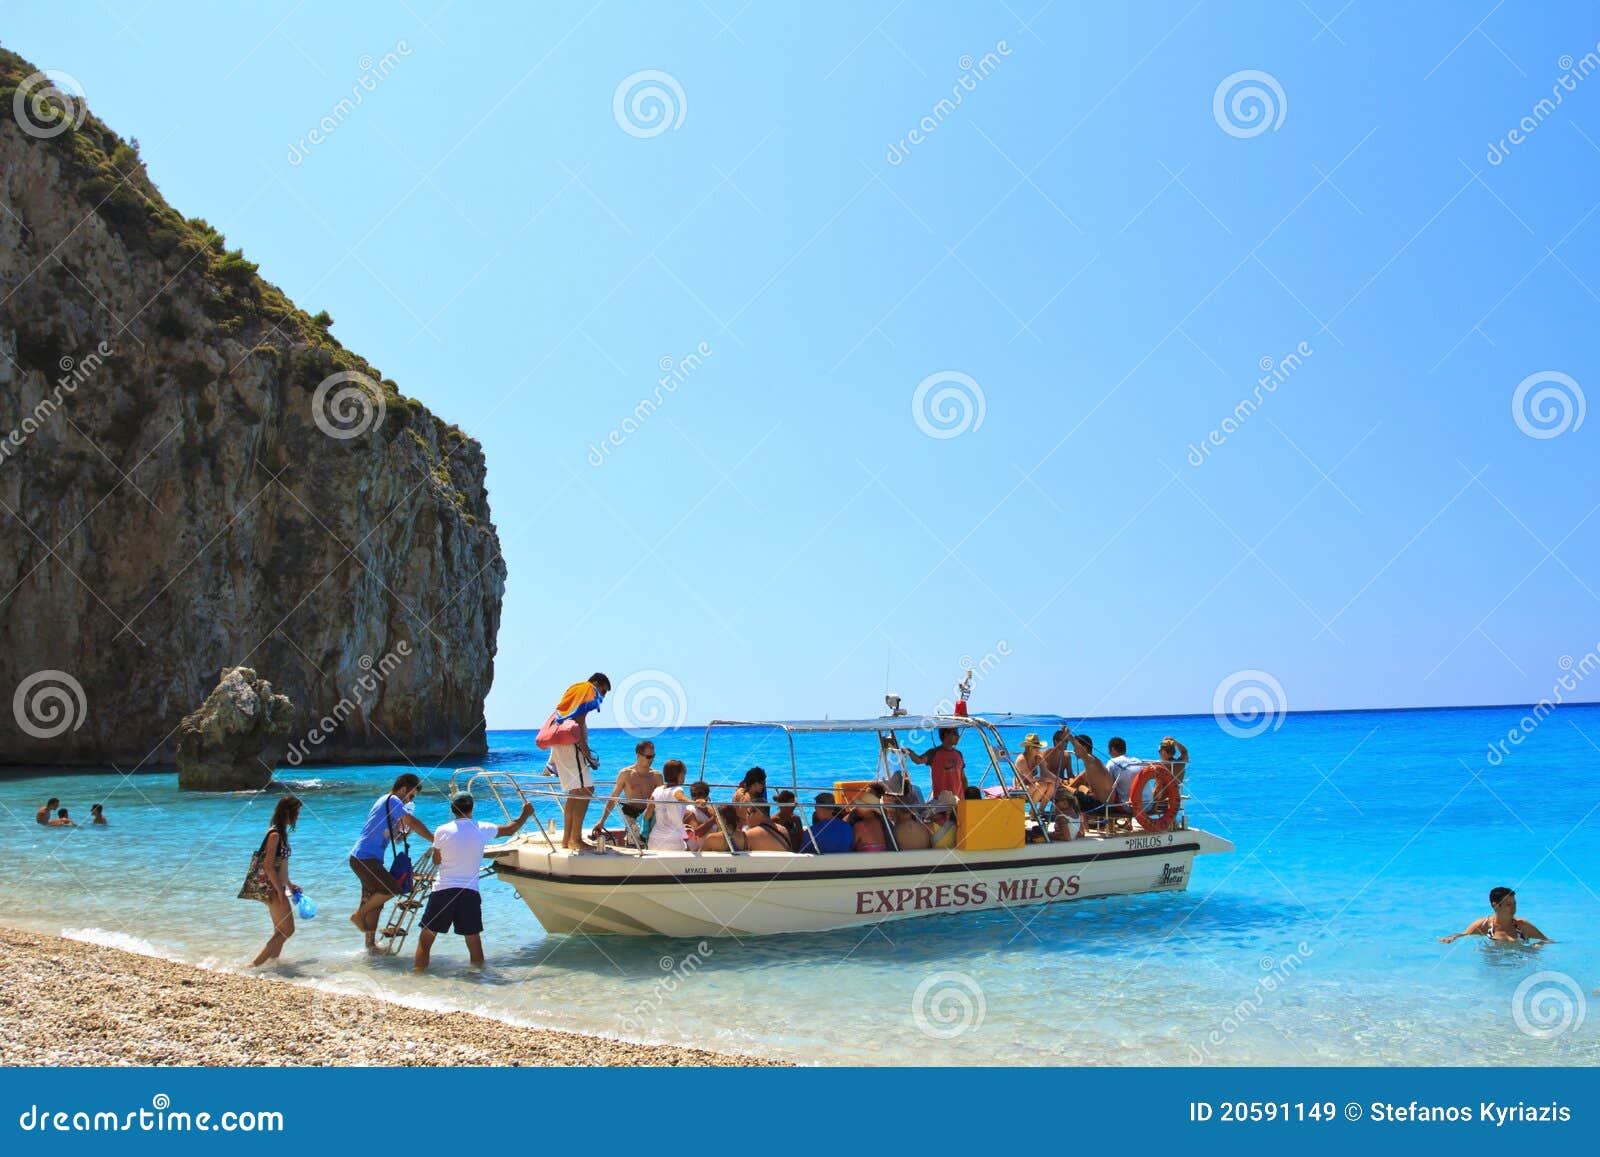 Tour boat in Greece editorial stock image. Image of leisure - 20591149